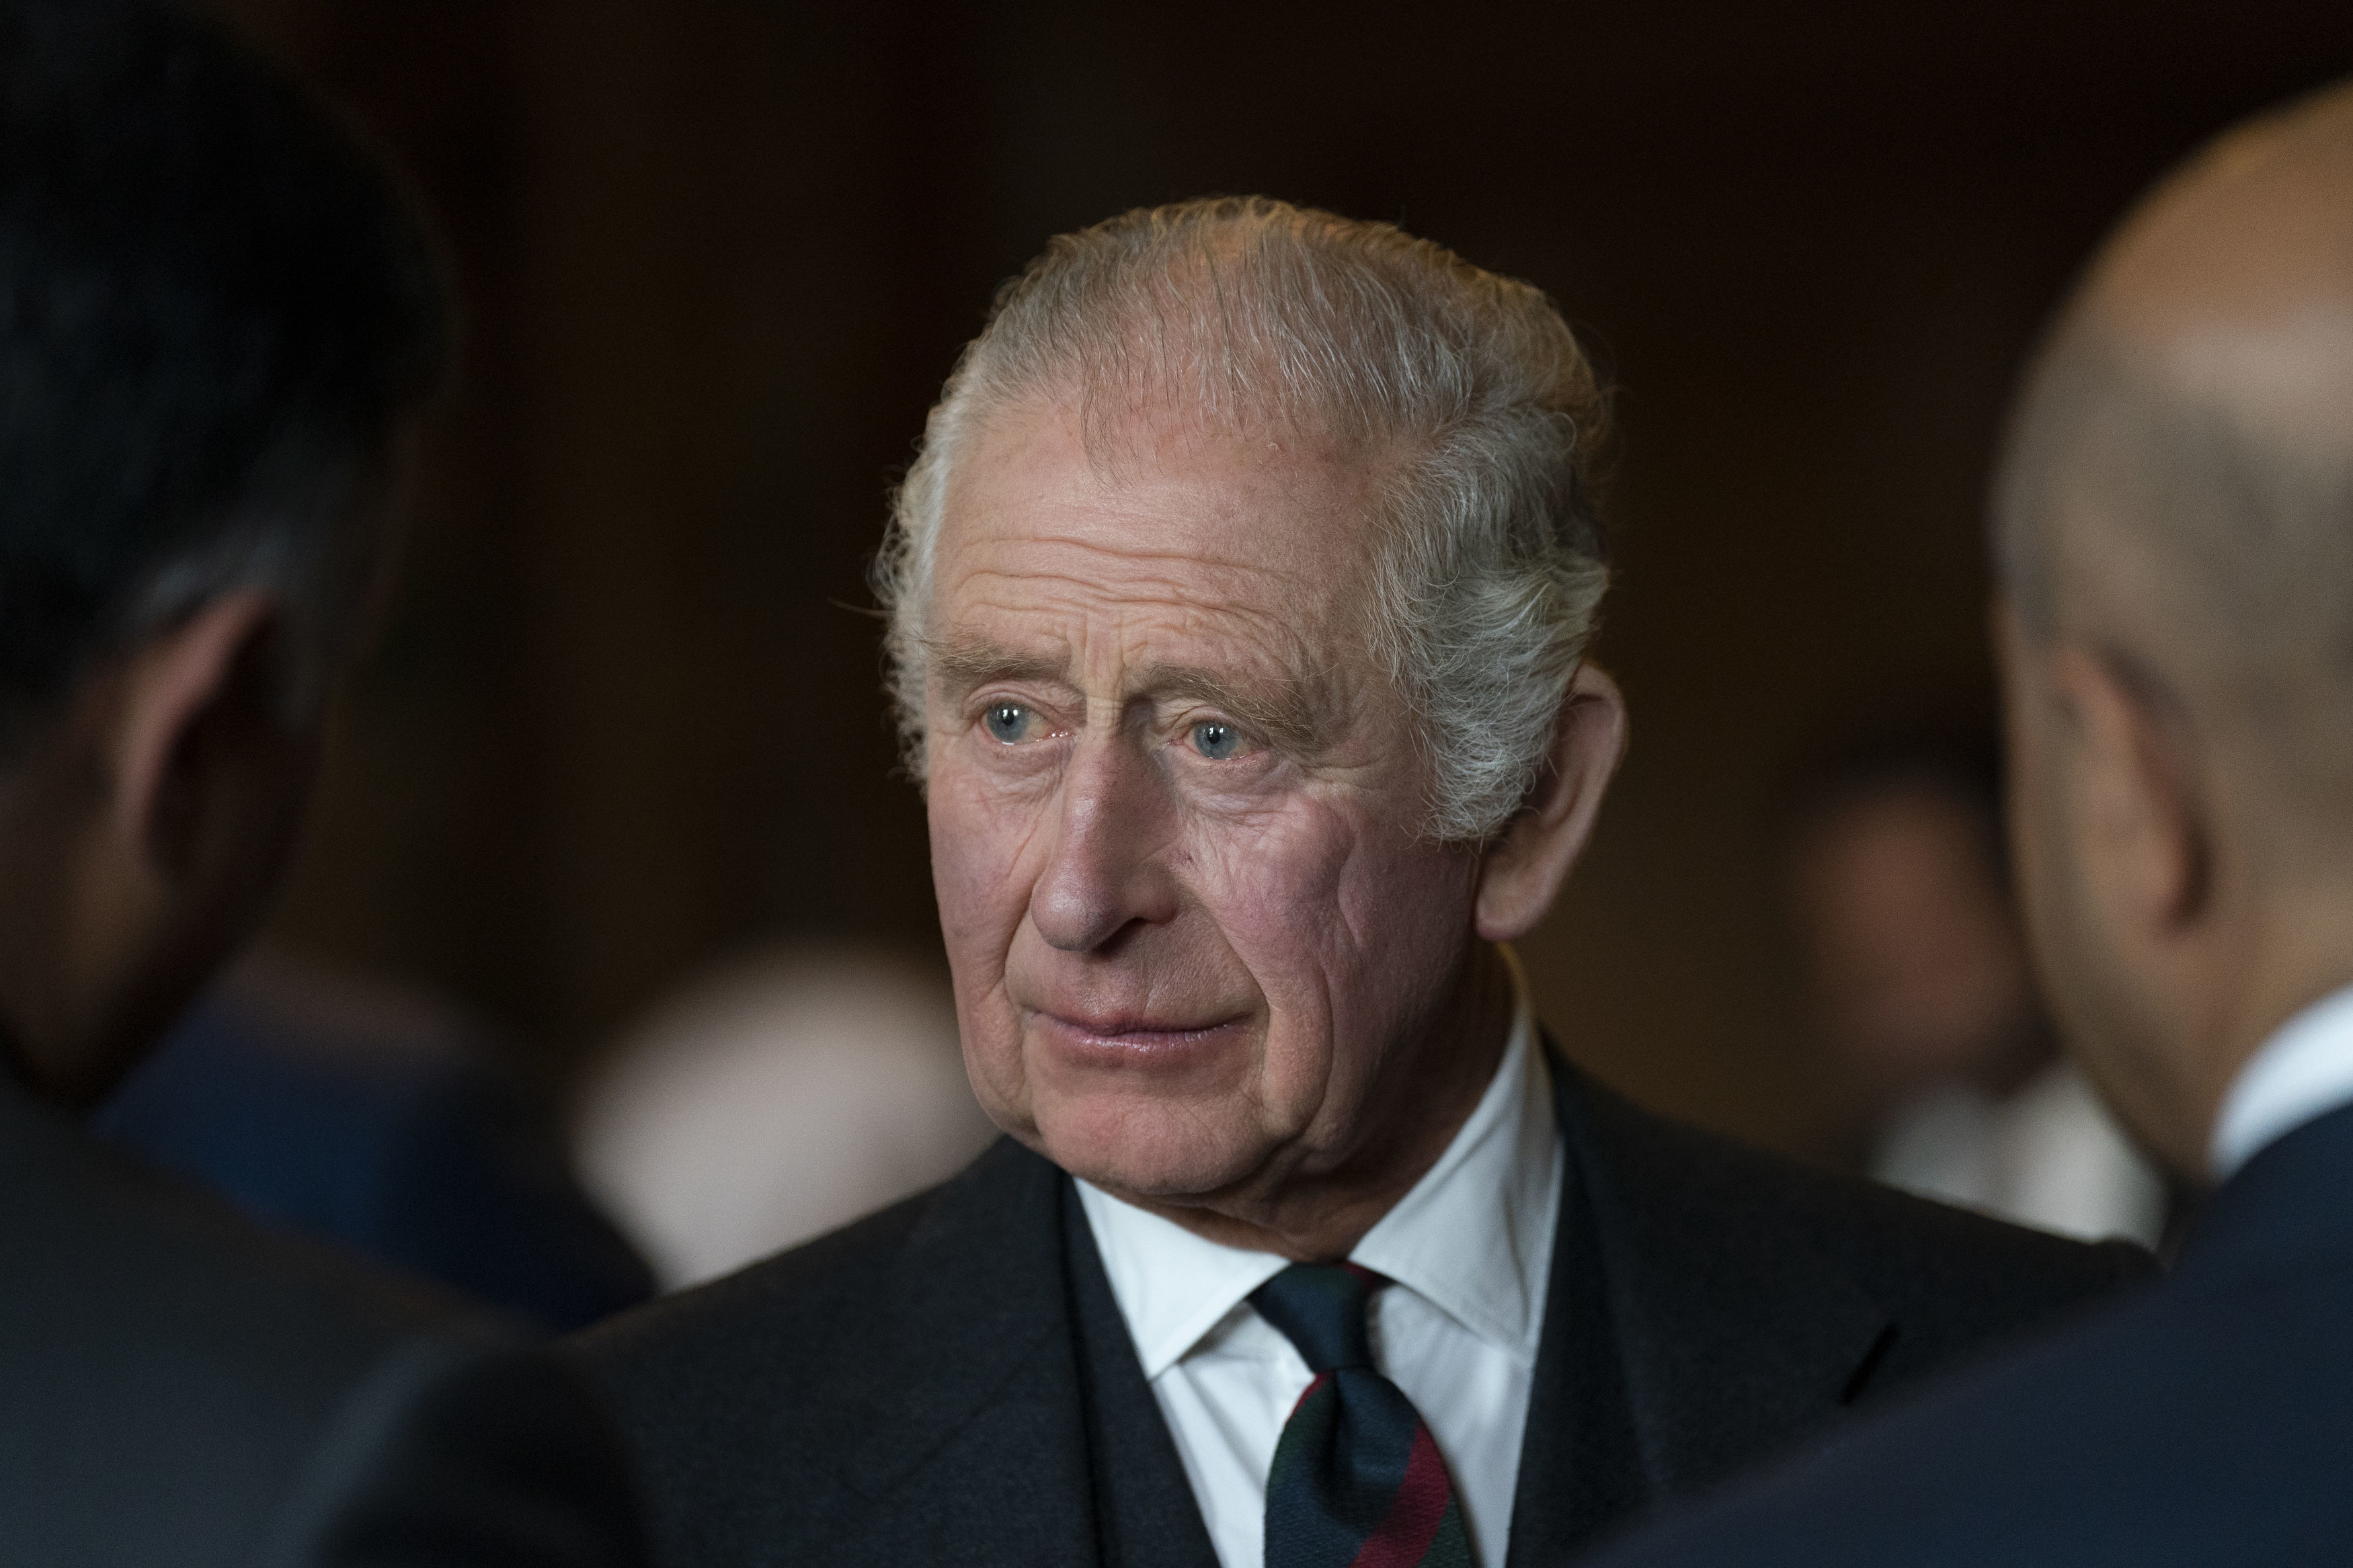 King Charles III hosts a reception to celebrate British South Asian communities, in Dunfermline, Scotland, on October 3, 2022. | Source: Getty Images